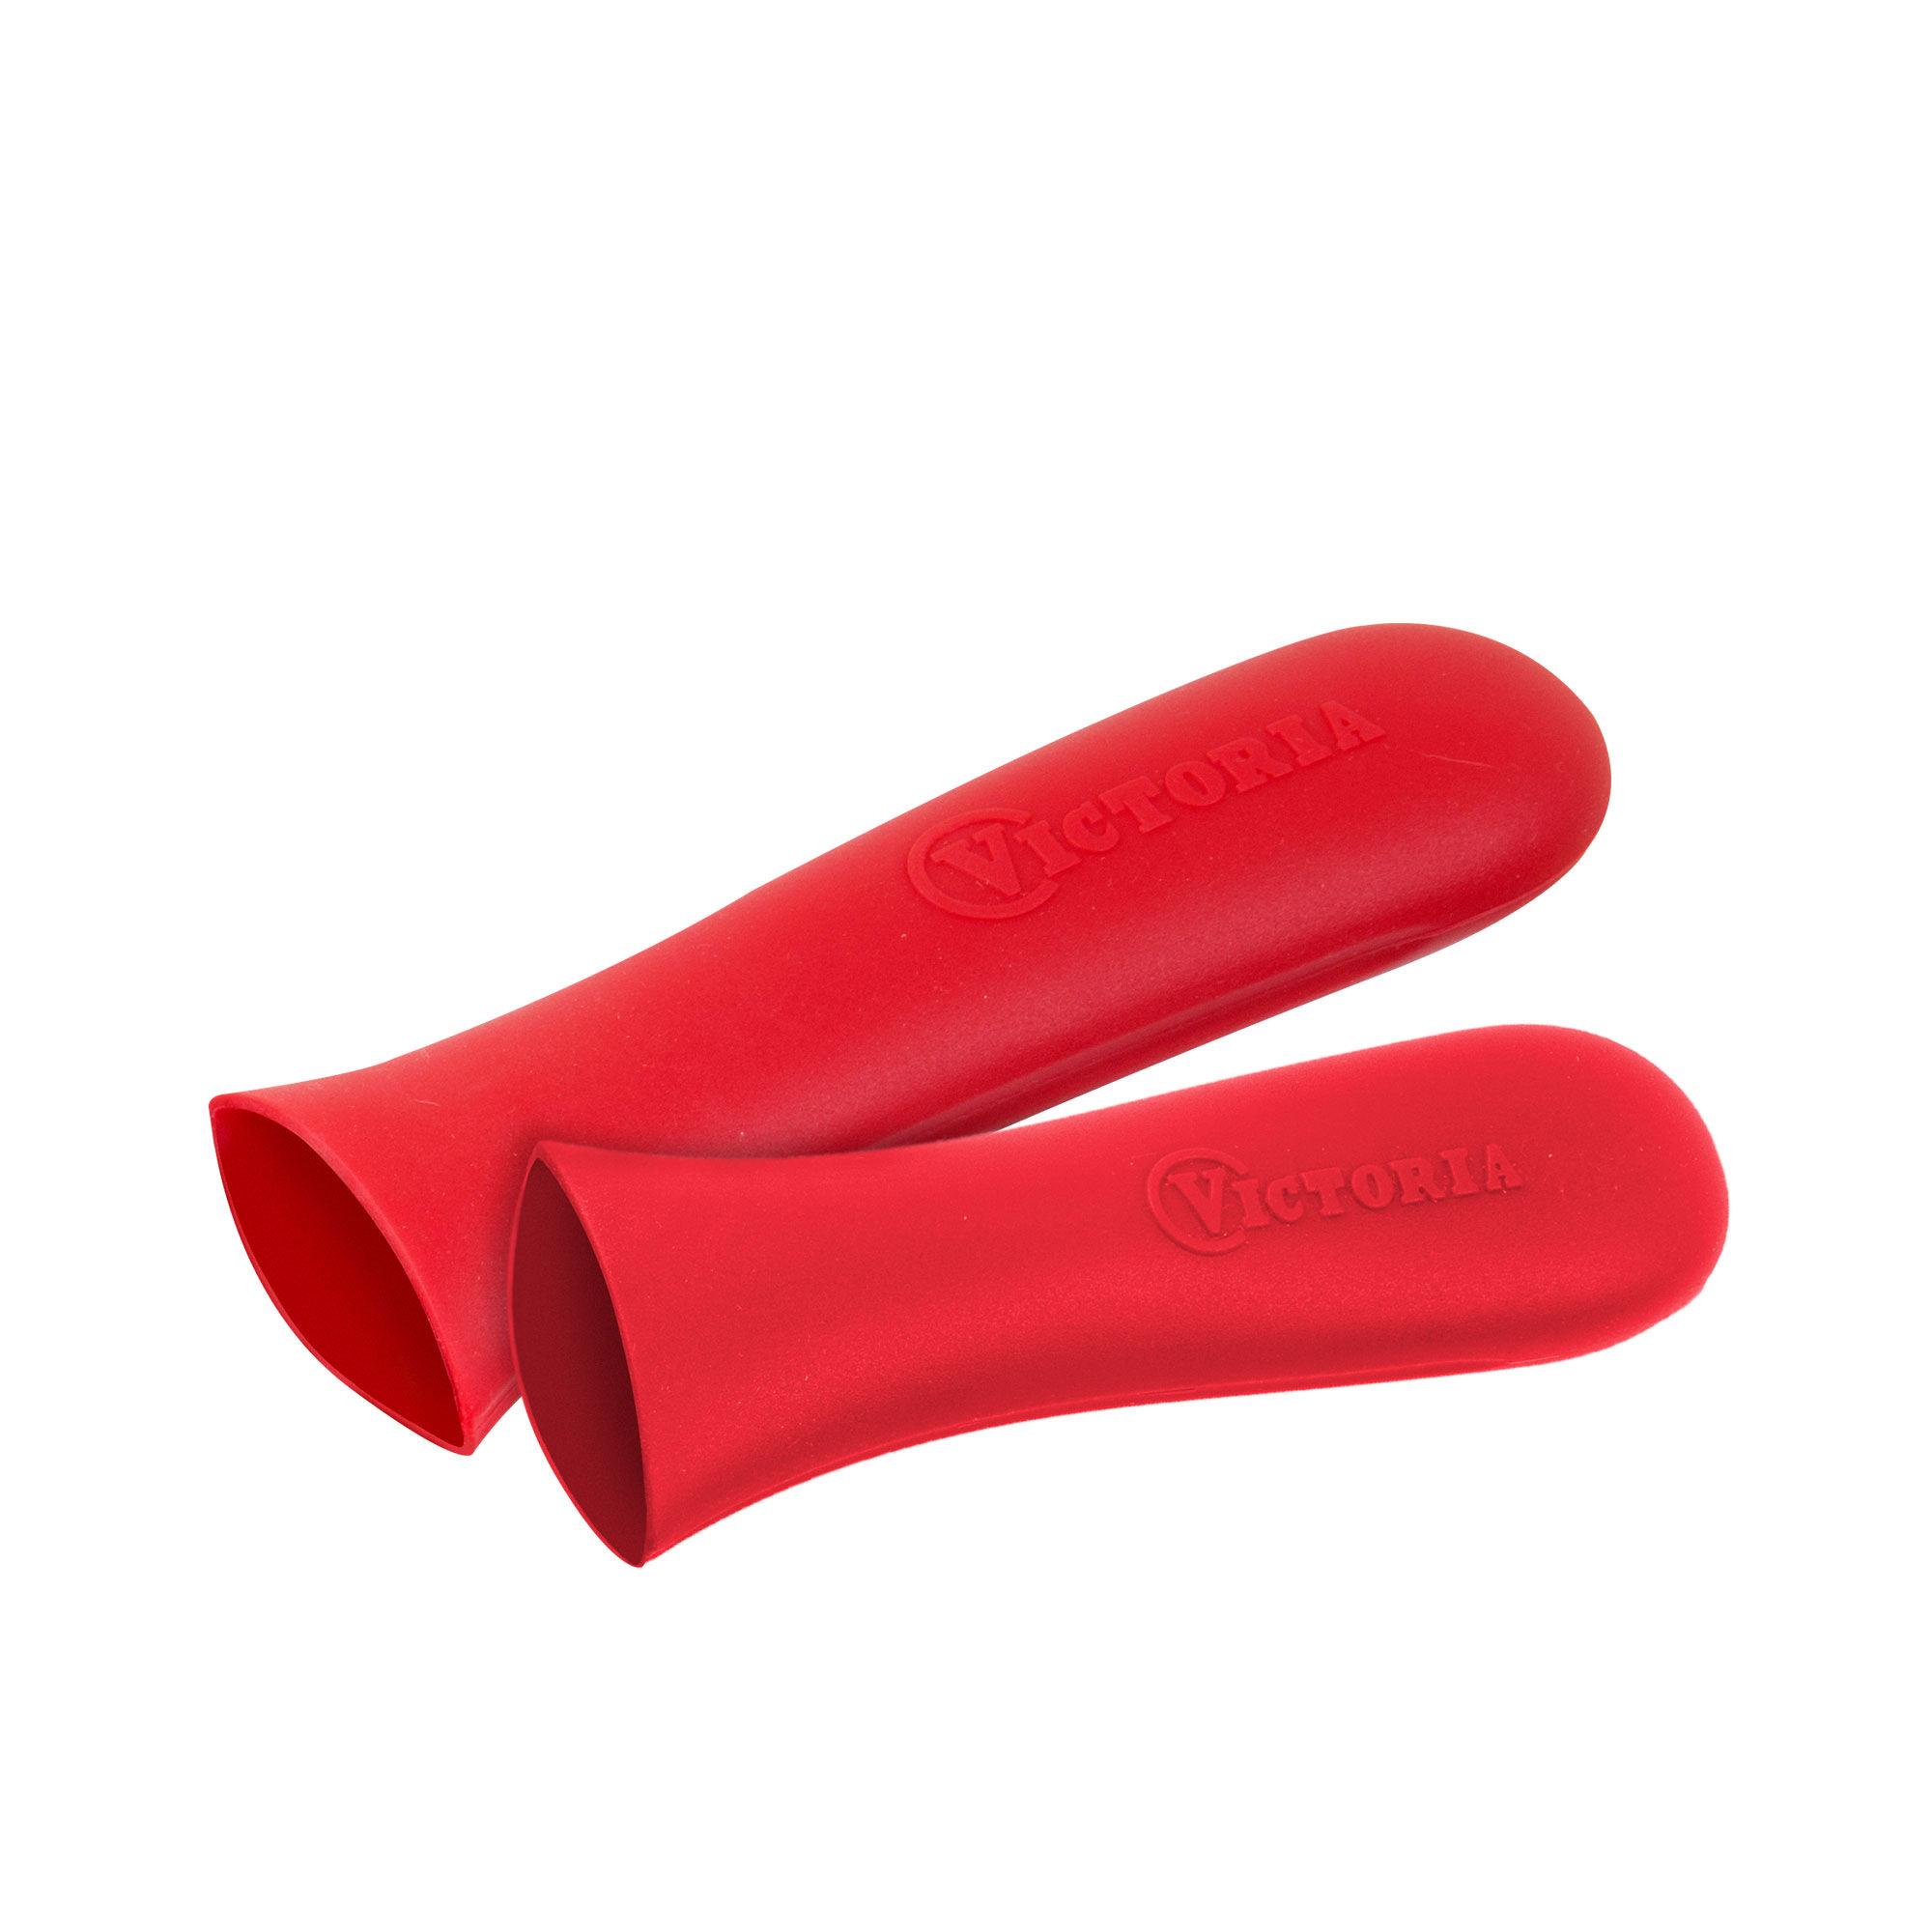 Victoria Silicone Handle Cover Large Image 3